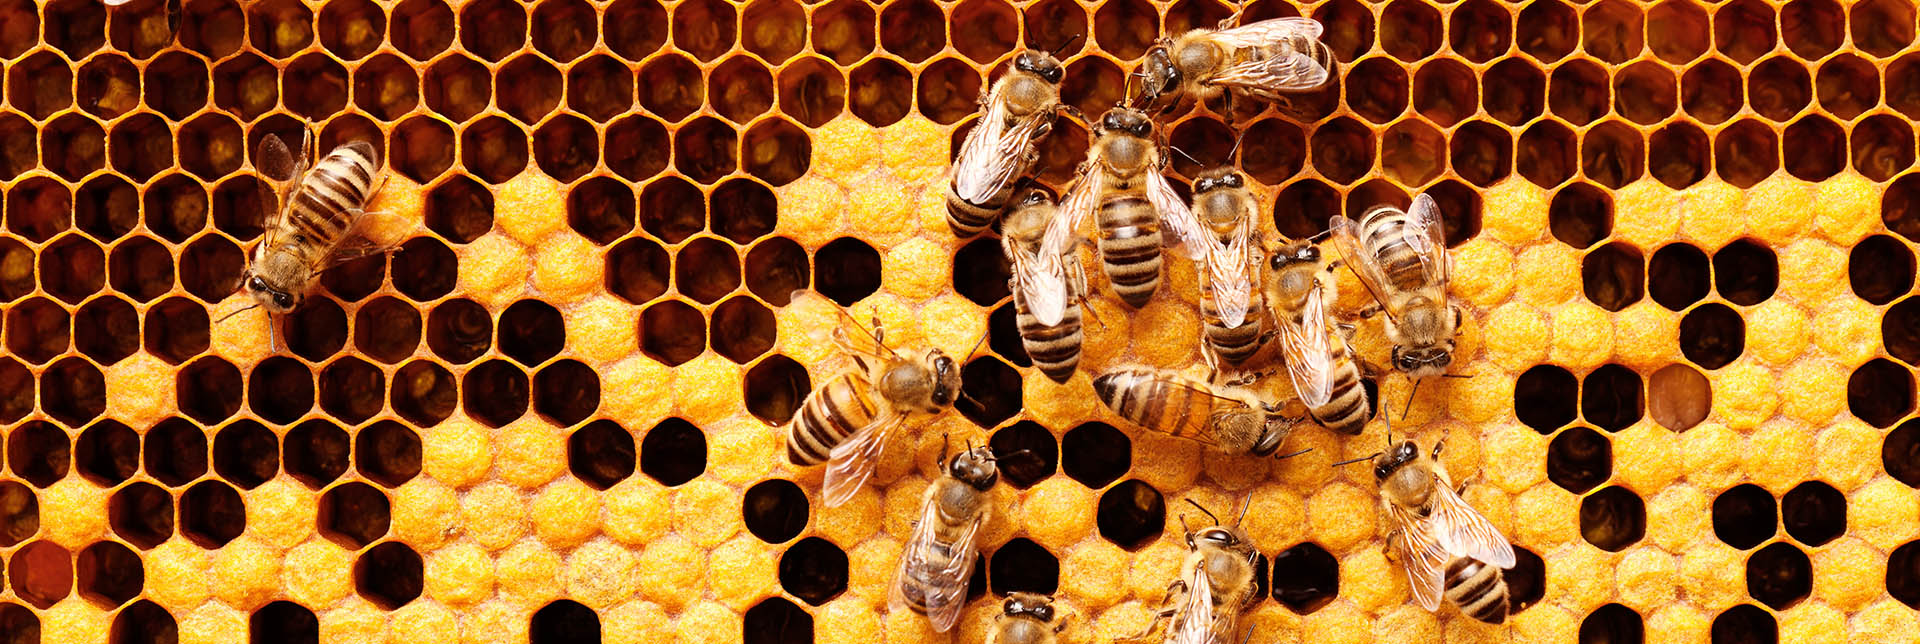 Shedding Light on the Secret Reproductive Lives of Honey Bees